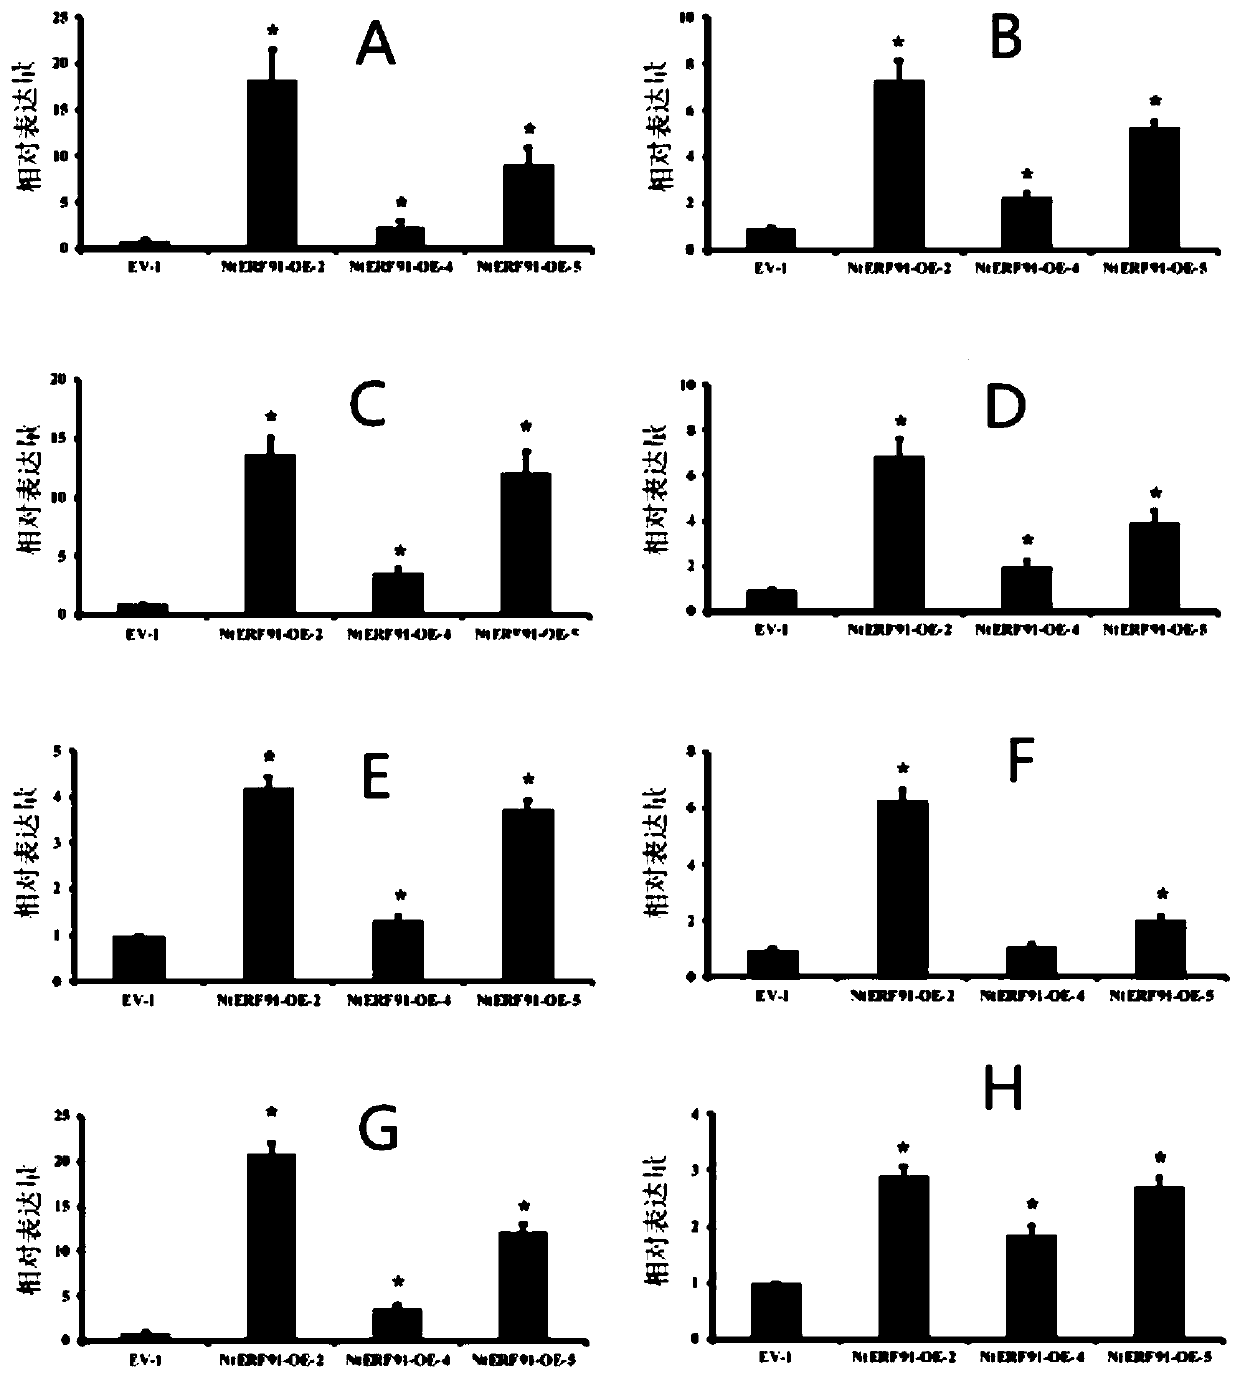 Cloning and application of tobacco neonicotinoid synthesis regulation gene NtERF91